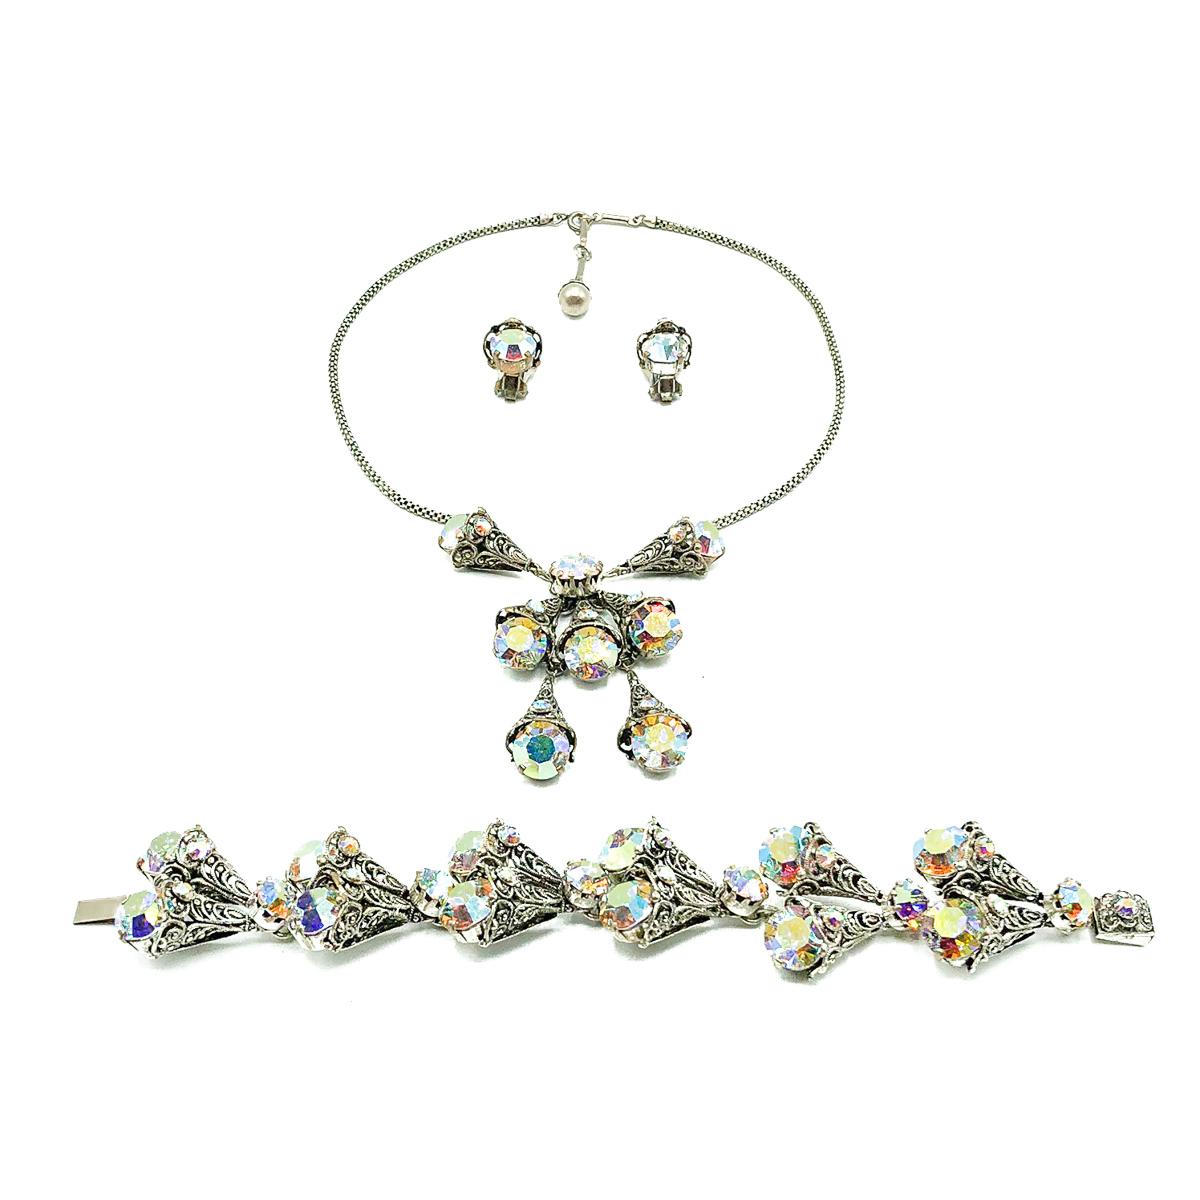 A divine and wonderfully feminine Vintage Aurora Borealis Necklace Suite from the 1950s. Comprising necklace, bracelet and earrings designed around a theme of filigree cones claw set with large, vibrant rainbow crystals . Crafted in silvertone metal